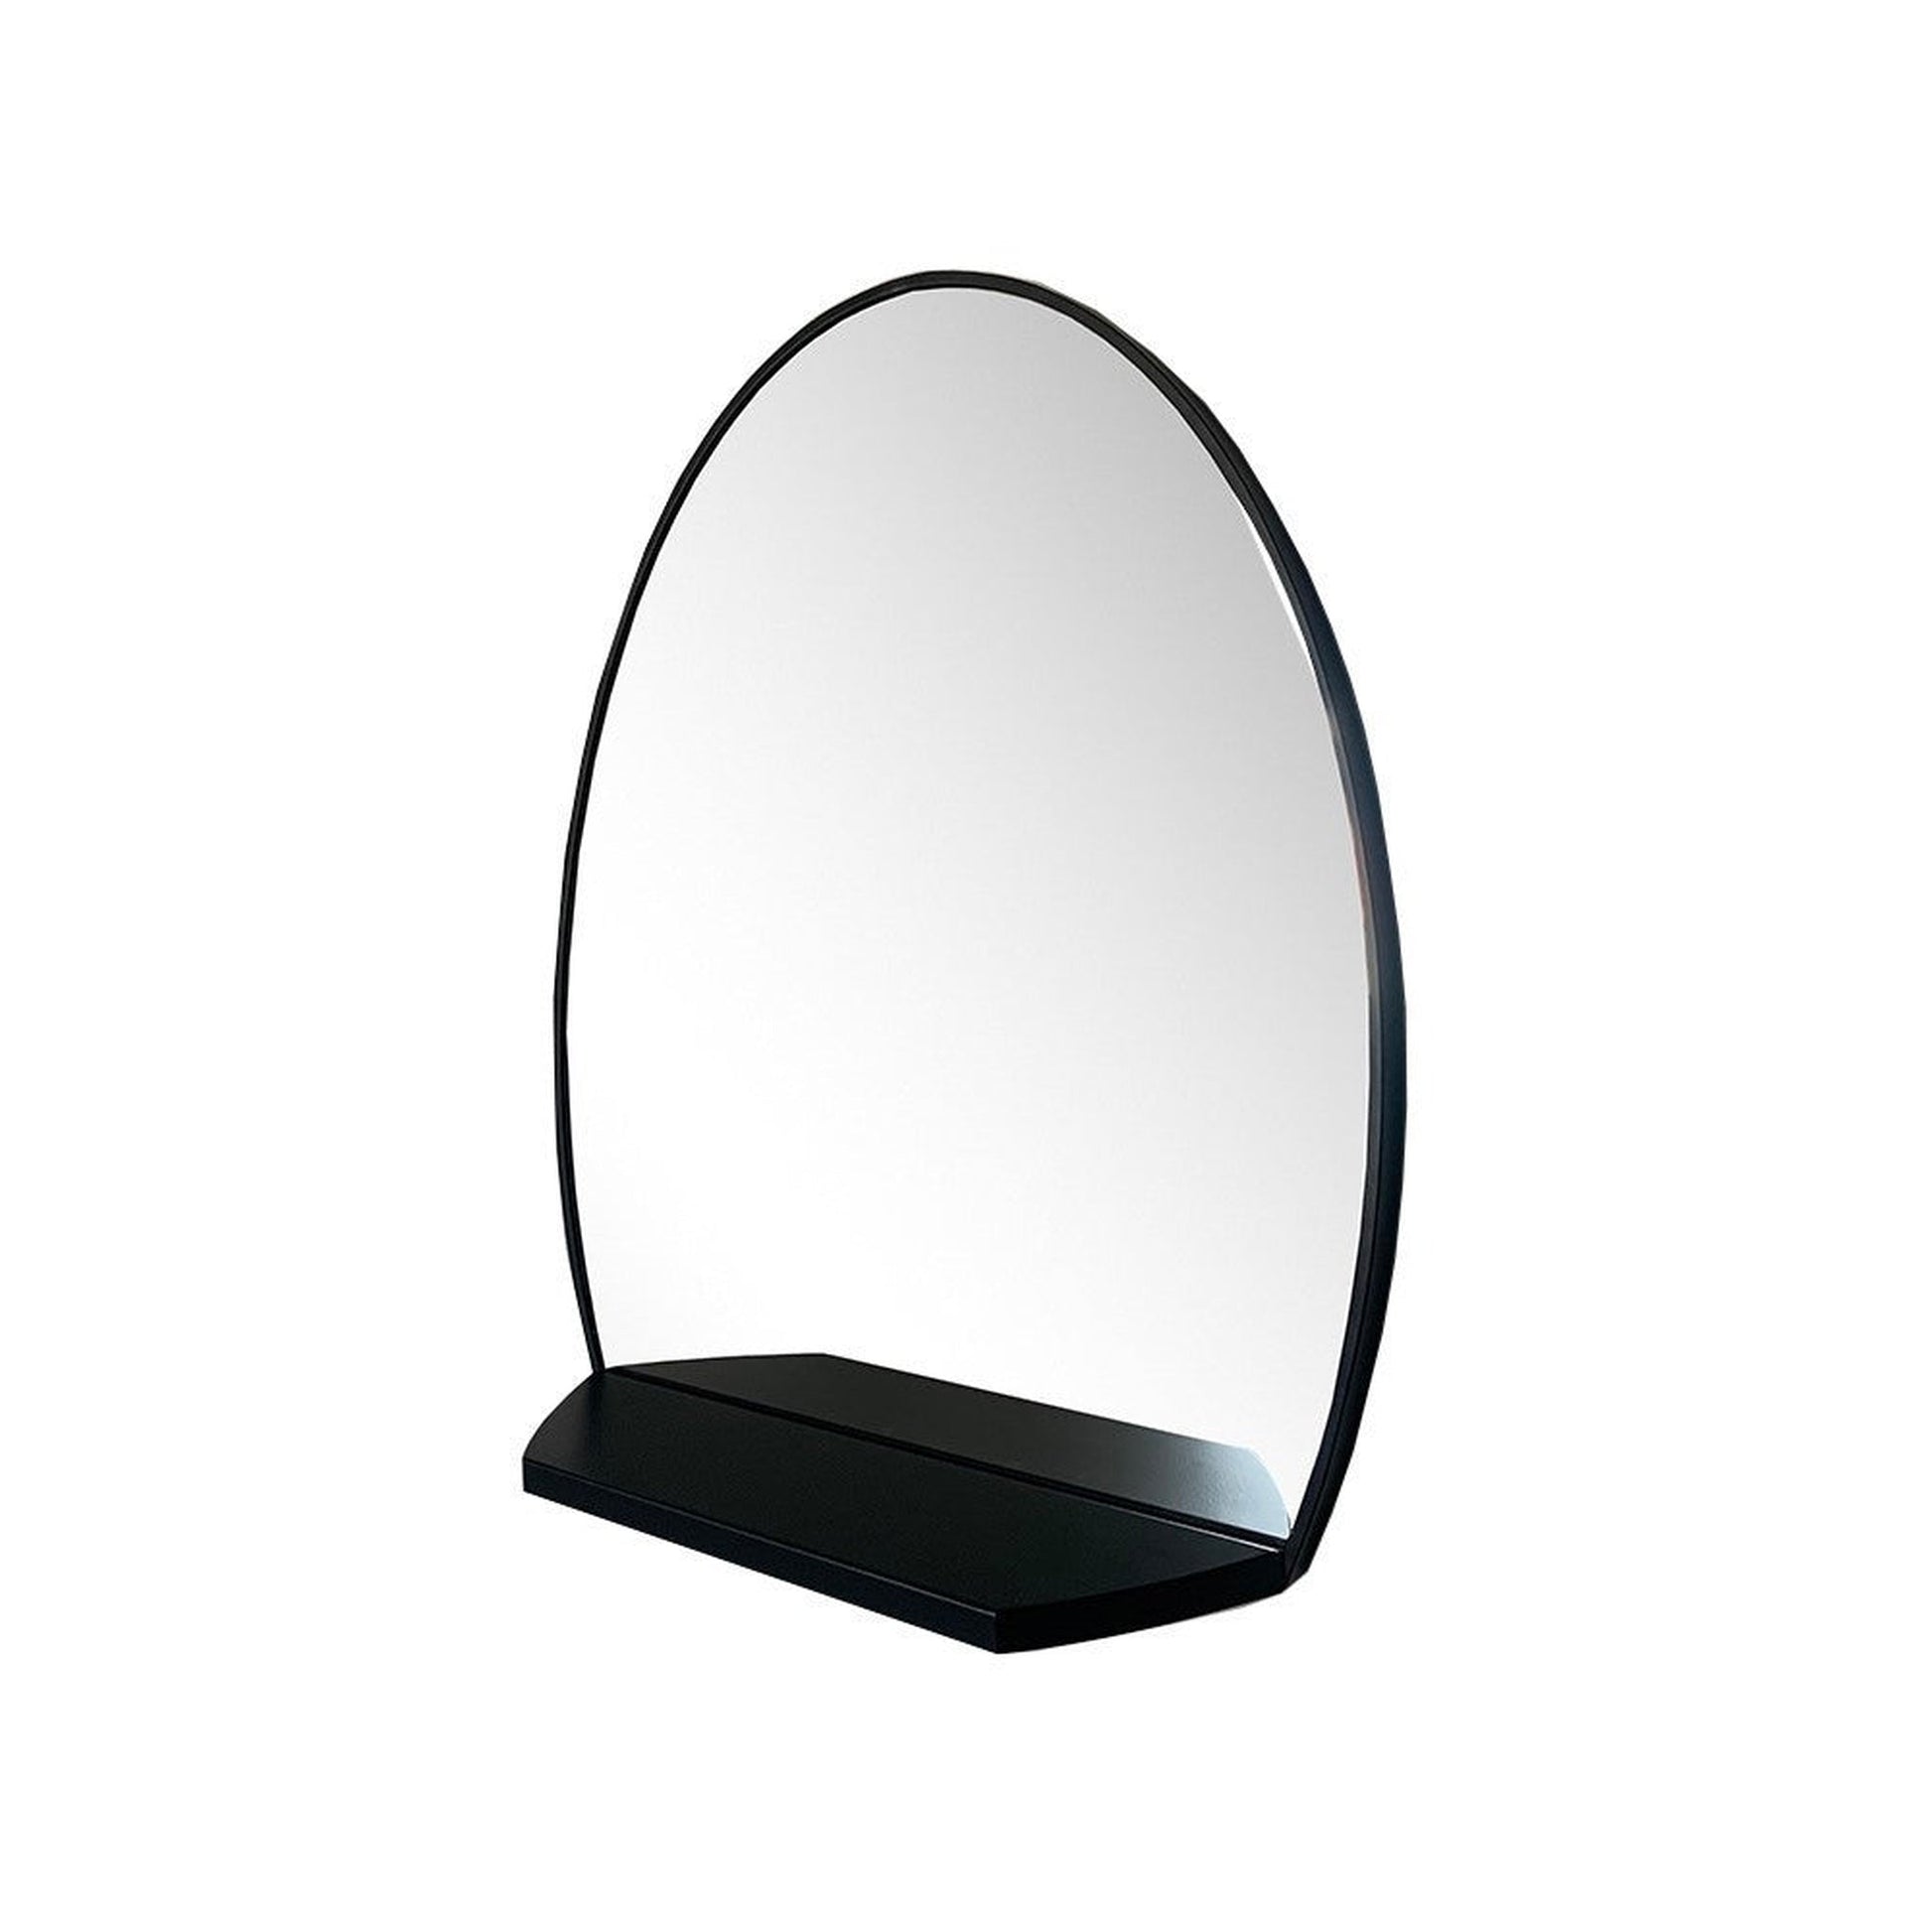 Bellaterra Home 24" x 28" Black Oval Wall-Mounted Steel Framed Mirror With Shelf